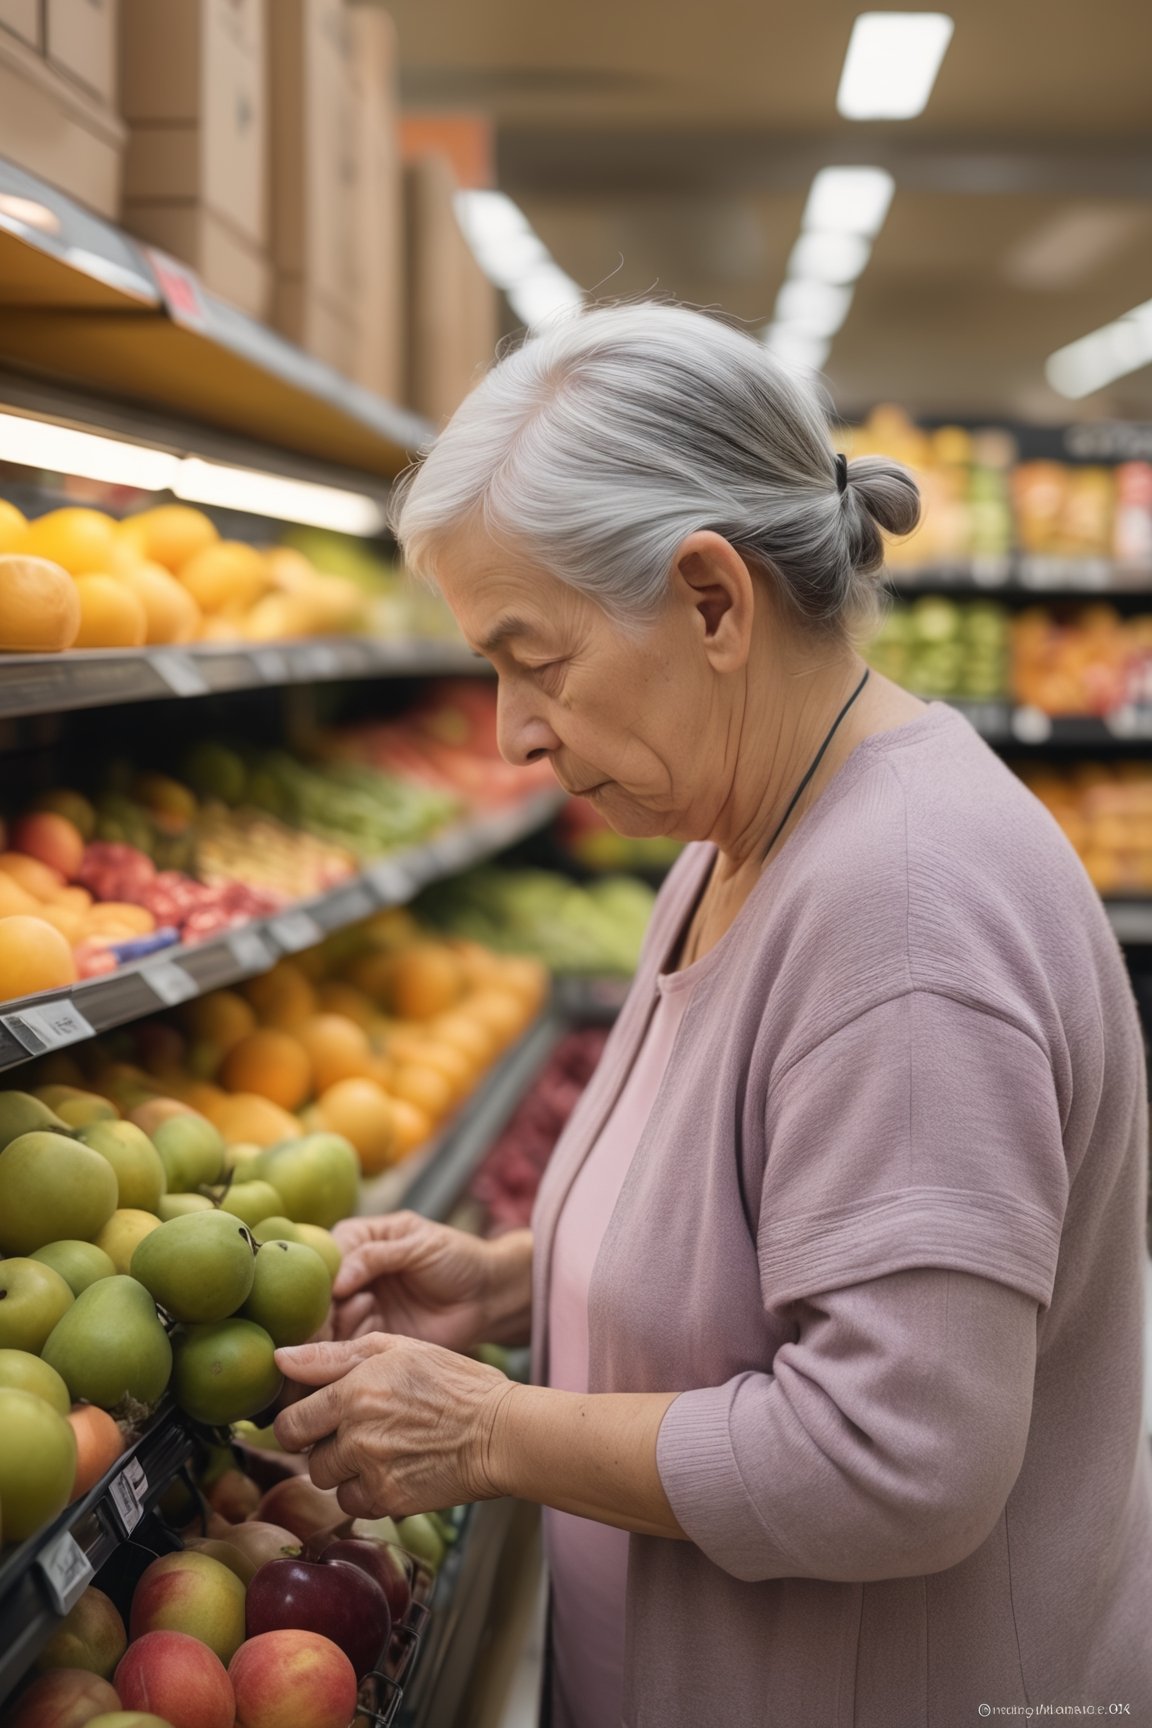 RAW photo,
A tired elderly woman choosing fruit at the grocery store.

absurdres, masterpiece, award-winning photography, Volumetric lighting, extremely detailed, highest quality photo, RAW photo, 16k resolution, Fujifilm XT3, sharp focus, realistic texture